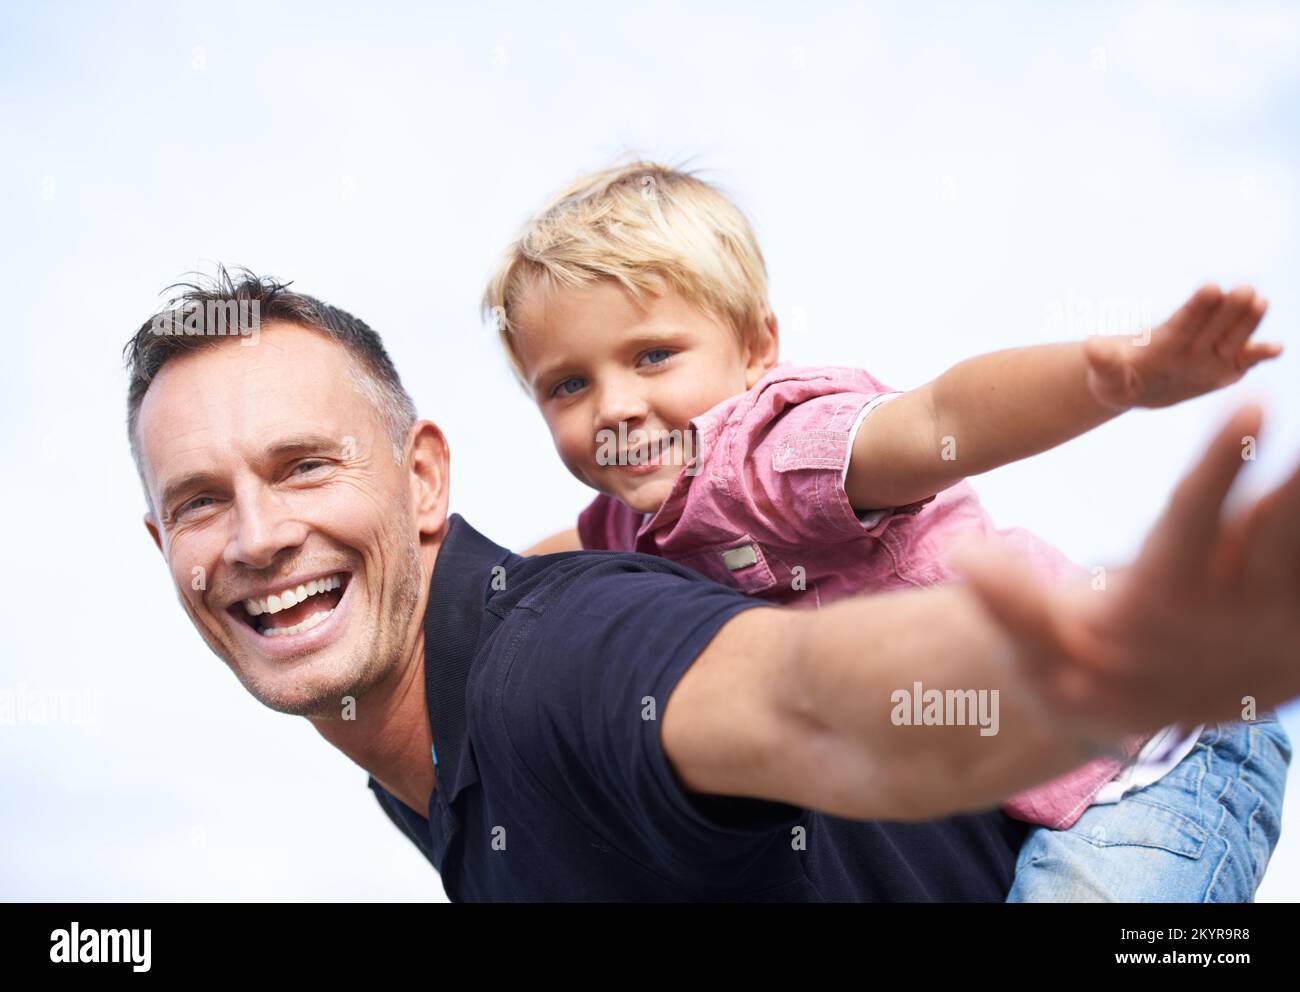 Giving his son wings. a smiling father giving his son a piggyback outside. Stock Photo